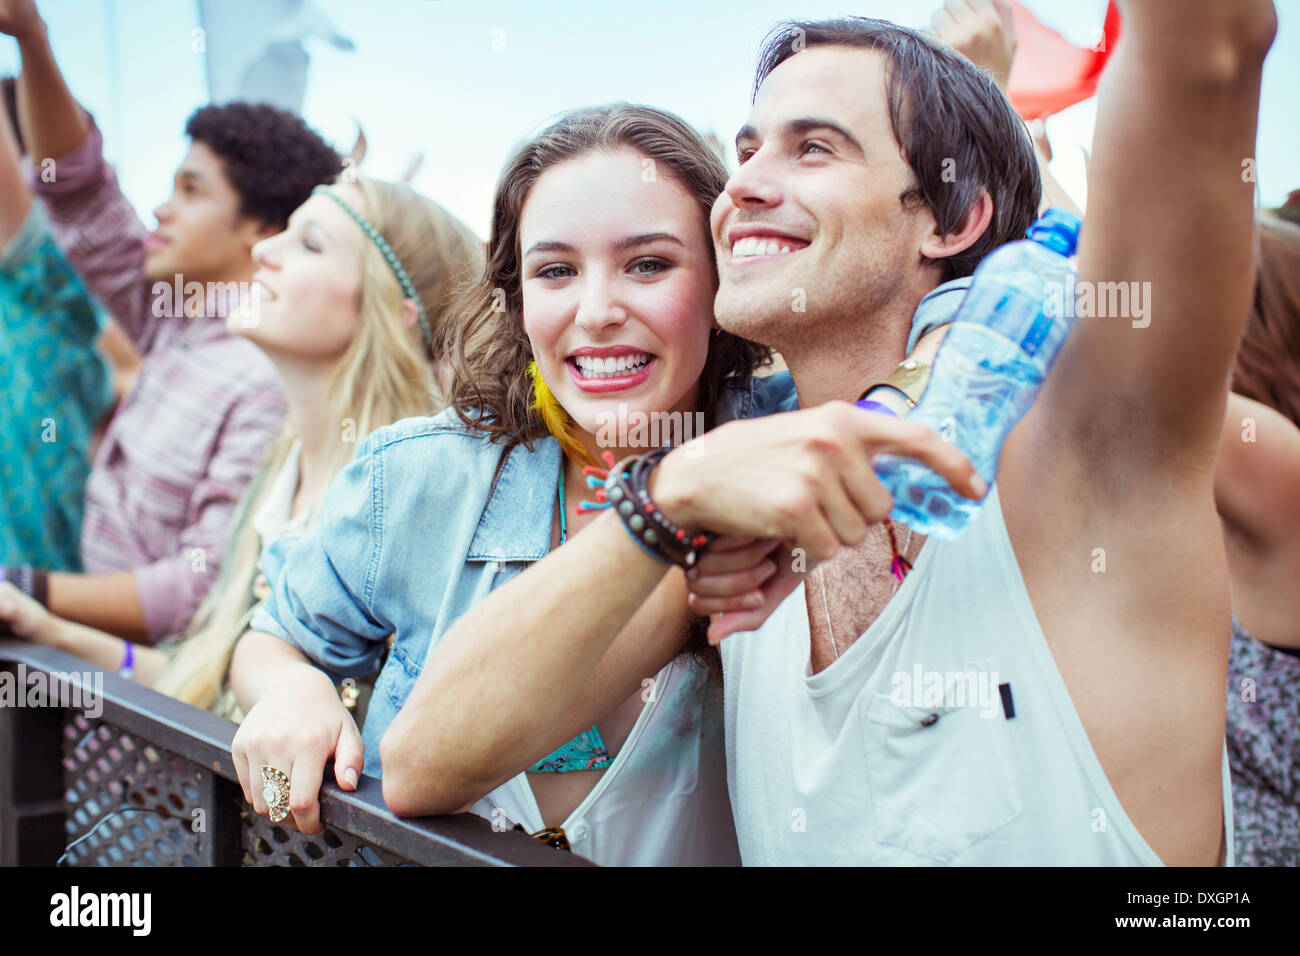 Couple cheering at music festival Stock Photo